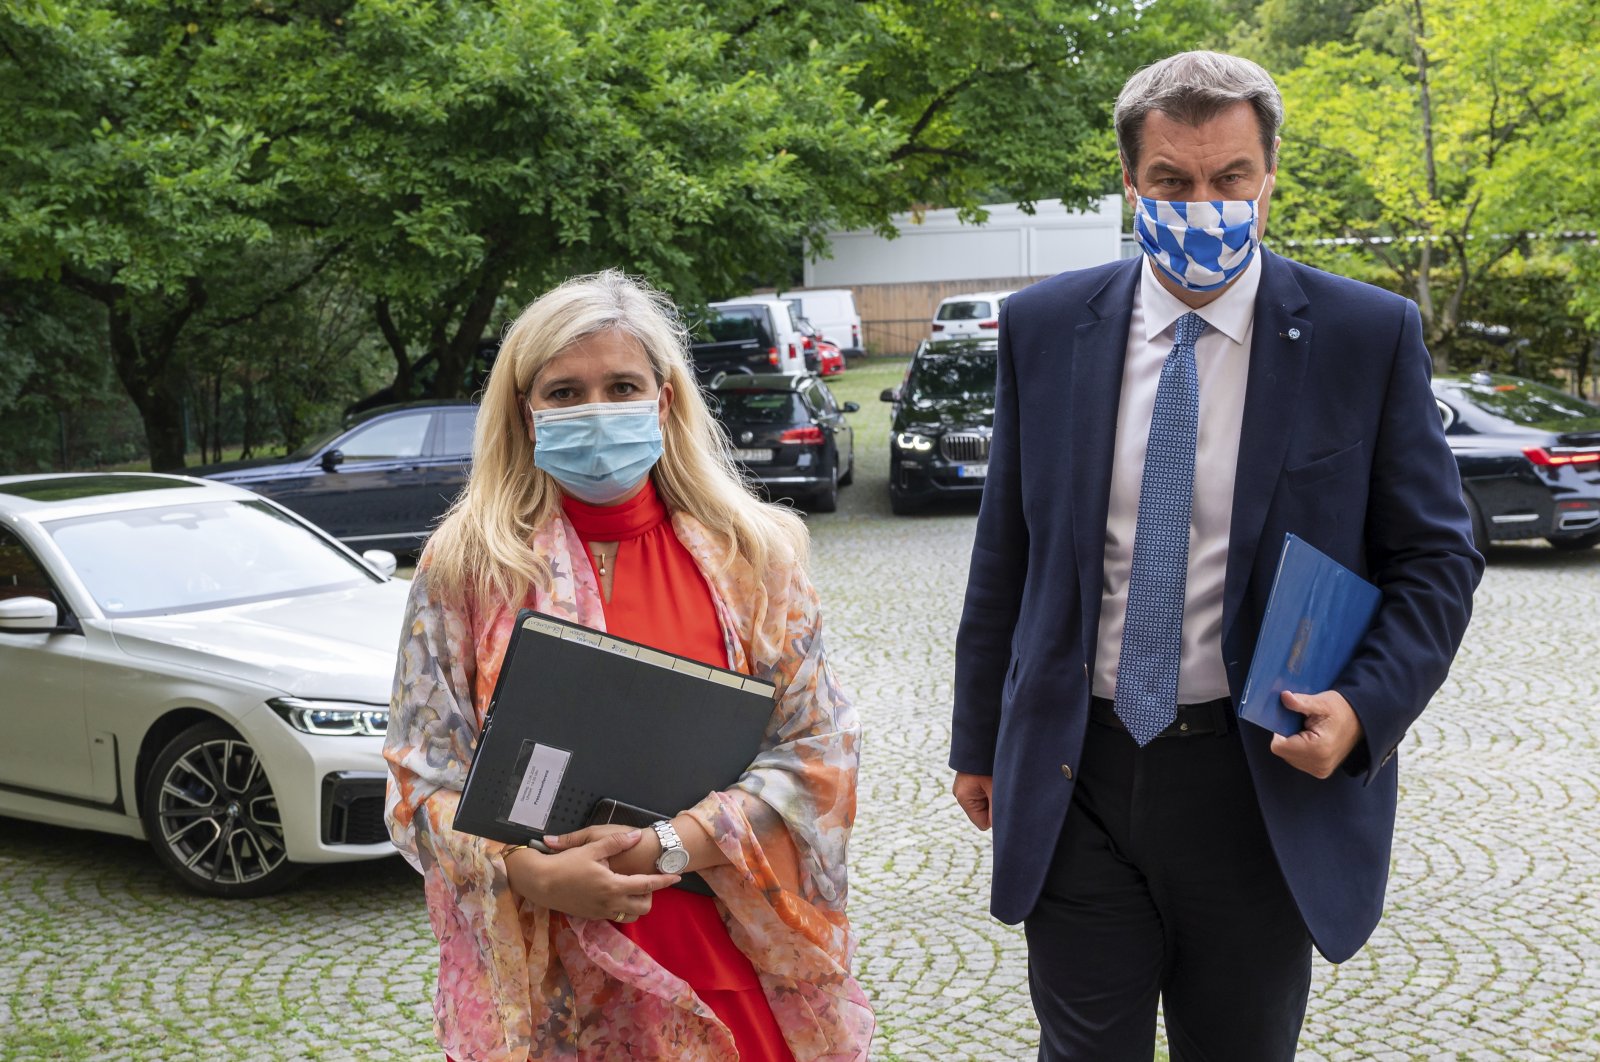 Melanie Huml, Health Minister of the German state of Bavaria, left, and Bavaria's premier Markus Soeder, right, arrive for a joint press conference in Munich, Germany, Thursday, Aug. 13, 2020. (AP Photo)